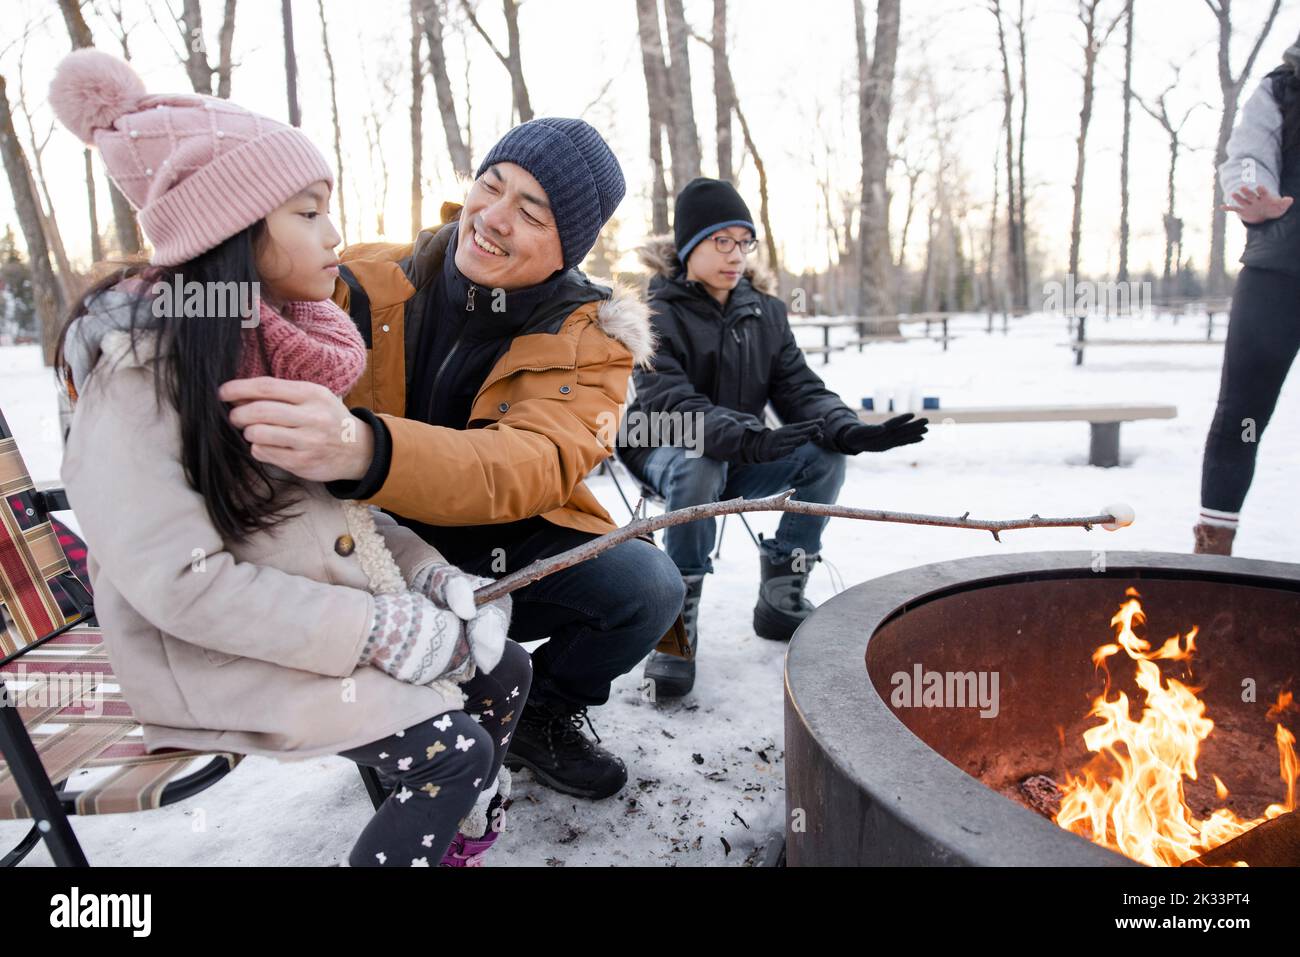 Happy family roasting marshmallows at fire pit in snowy winter park Stock Photo